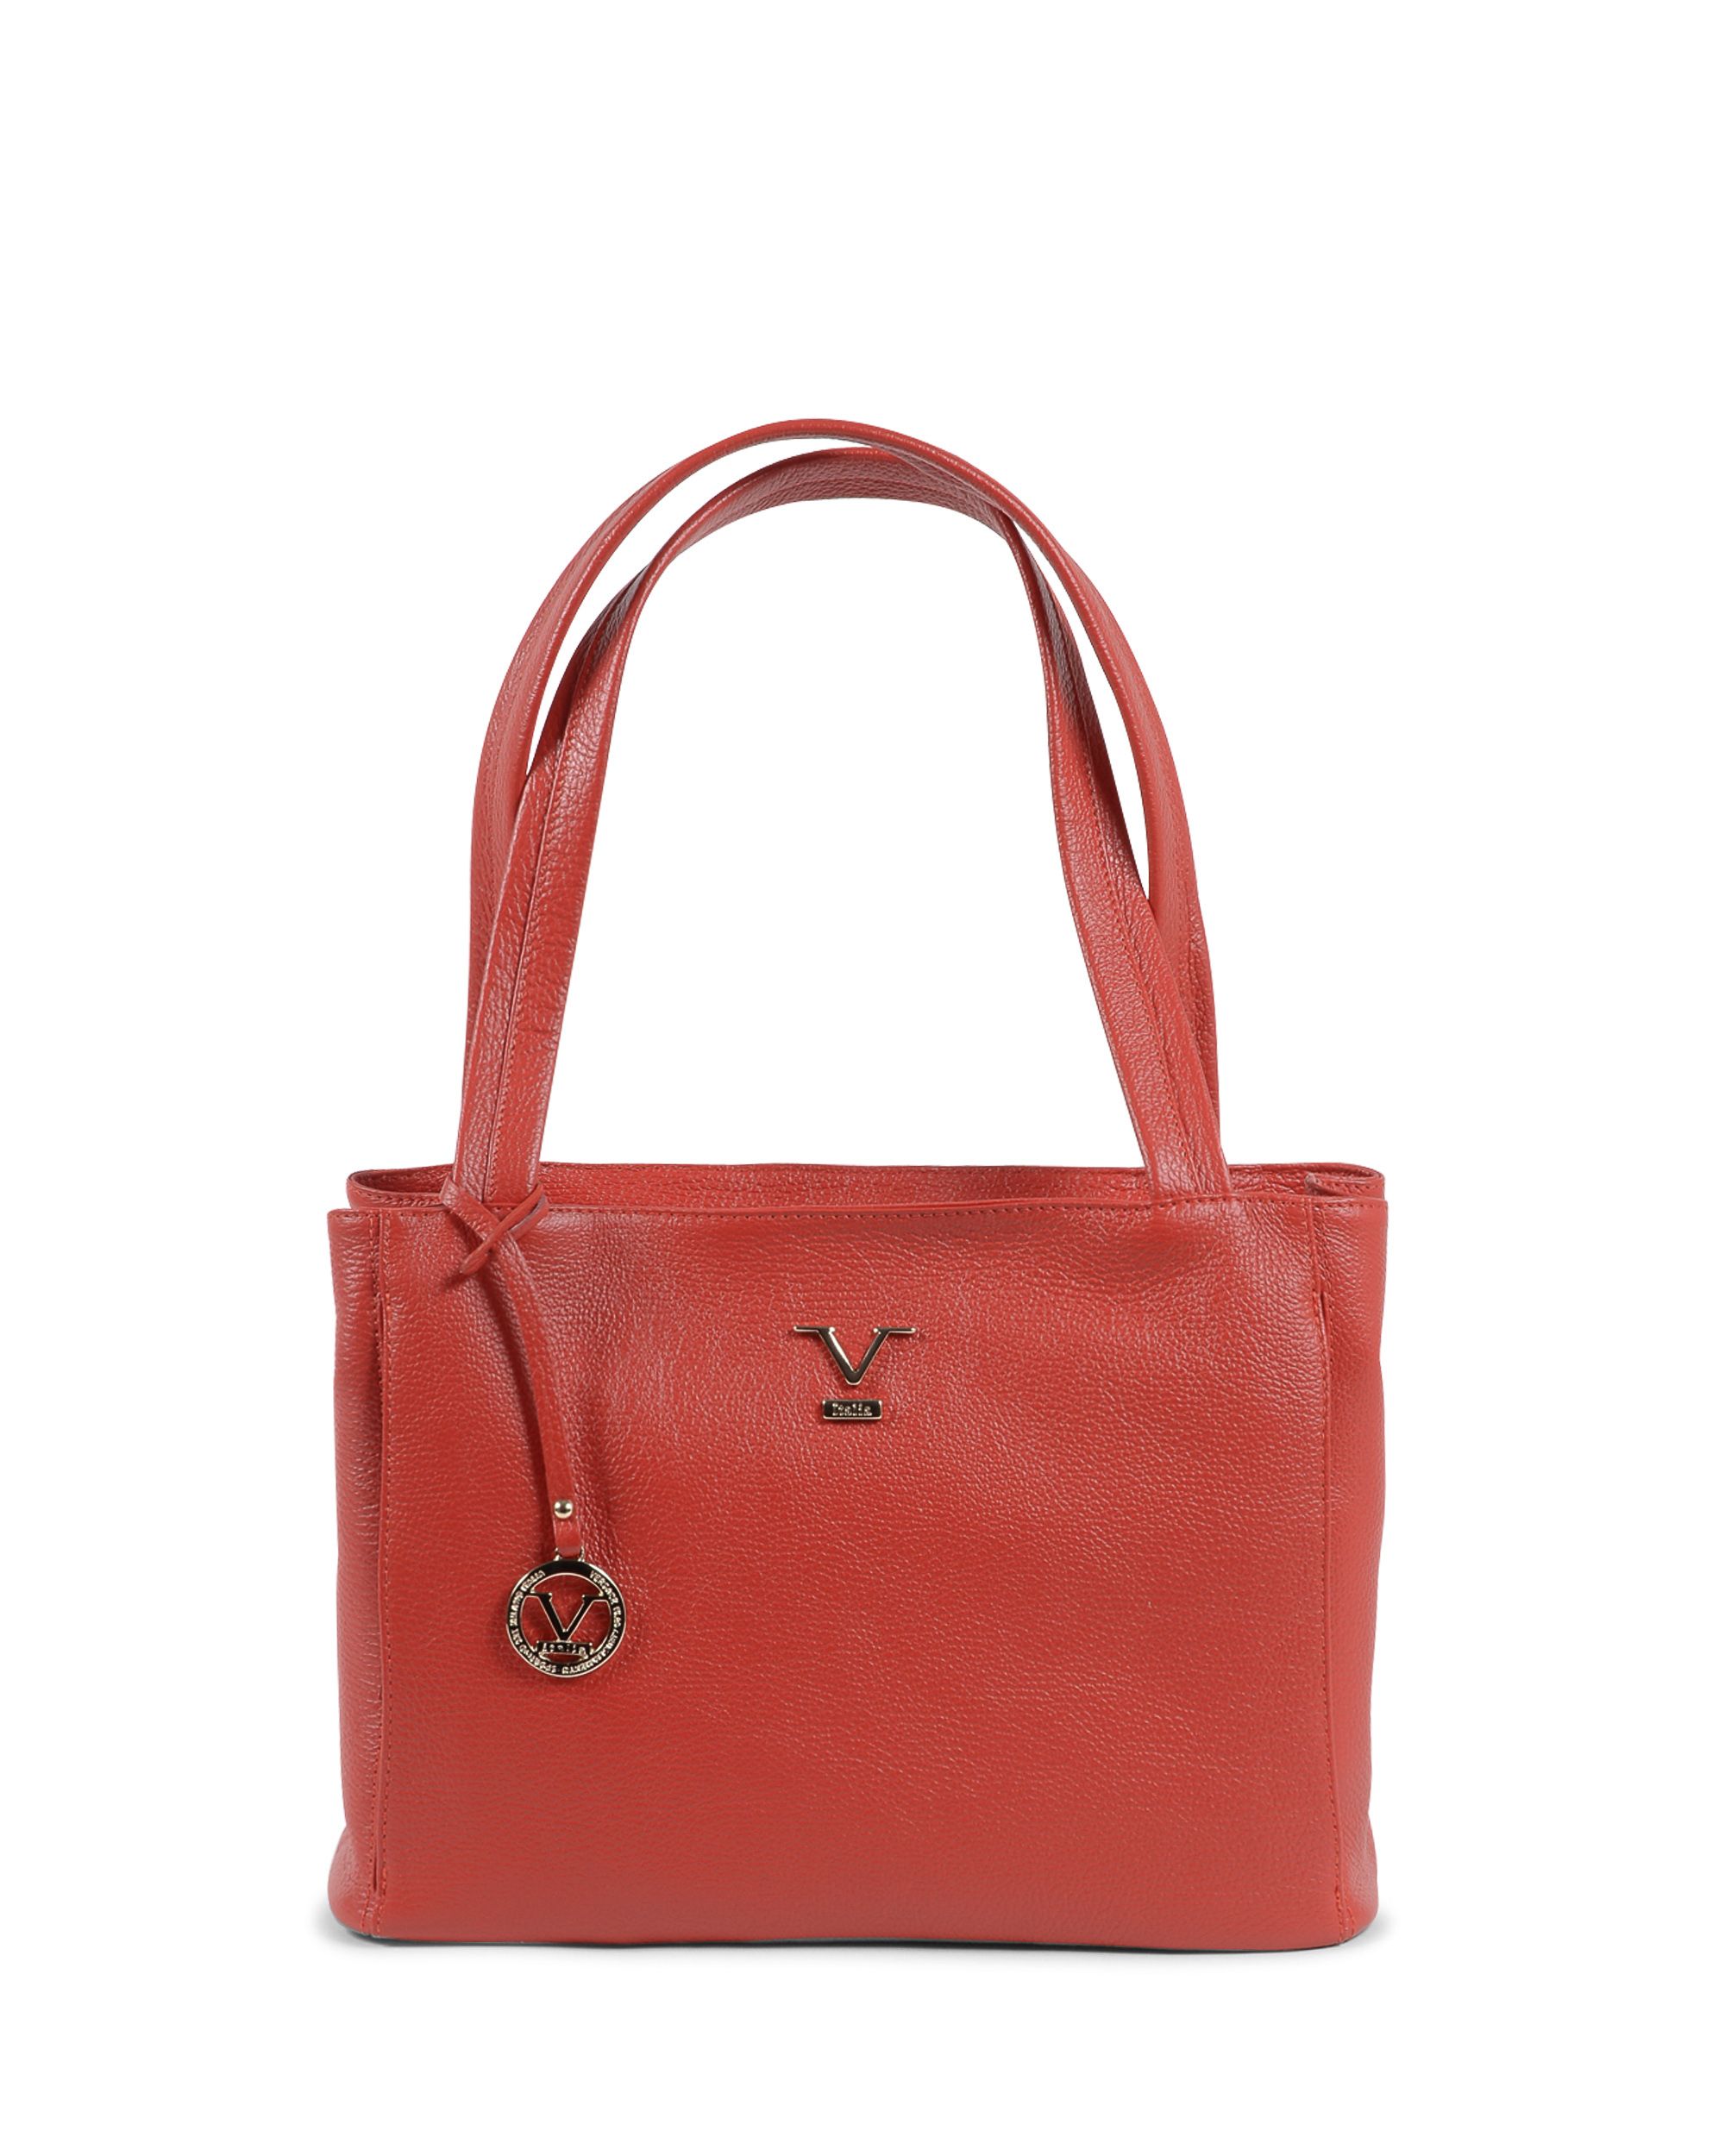 VE0792 ROSSO